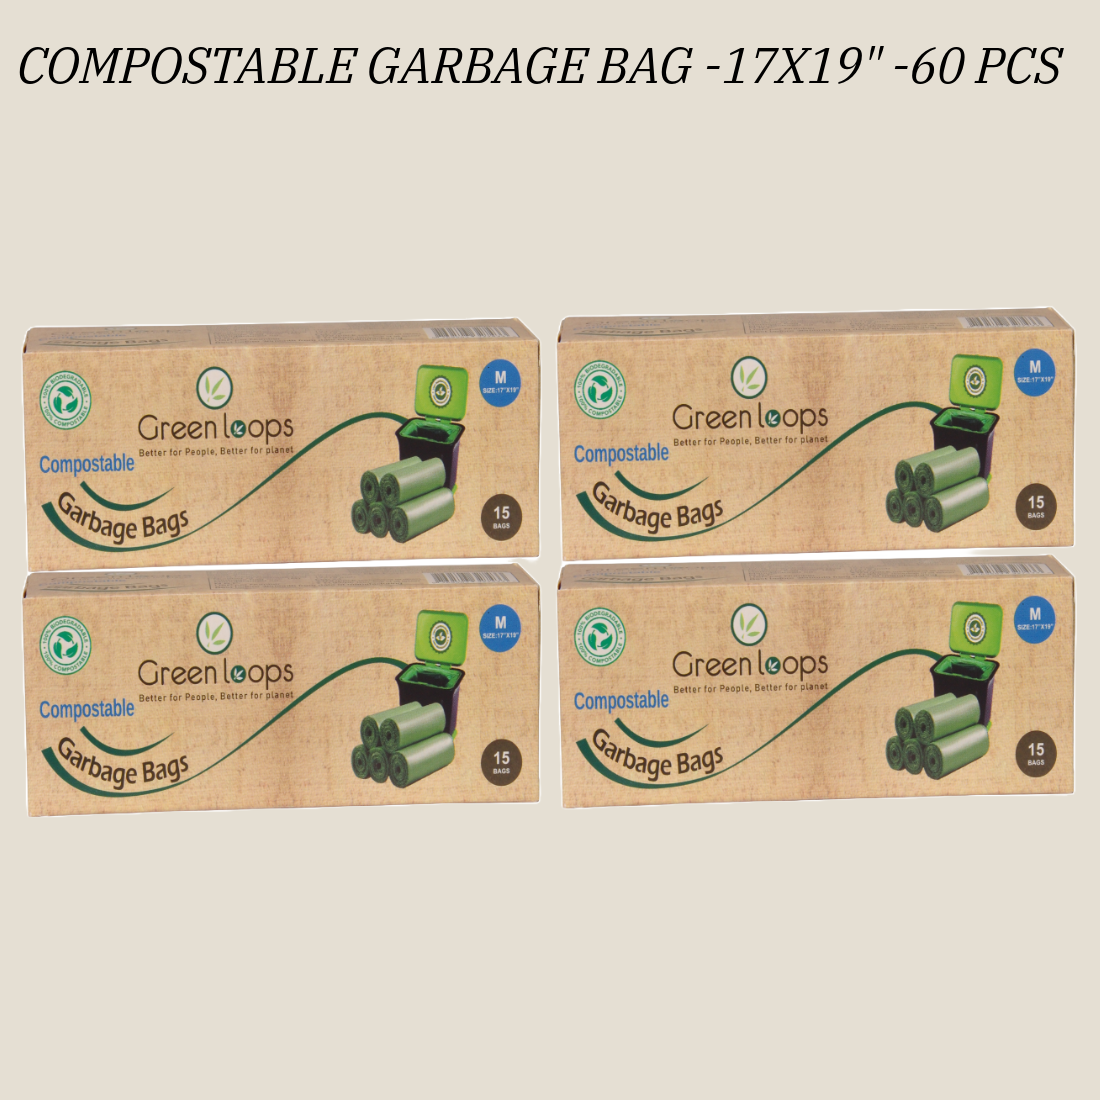 Compostable Garbage Bag Large Size 19"x21" - 60 Bag (Pack of 4 Roll)